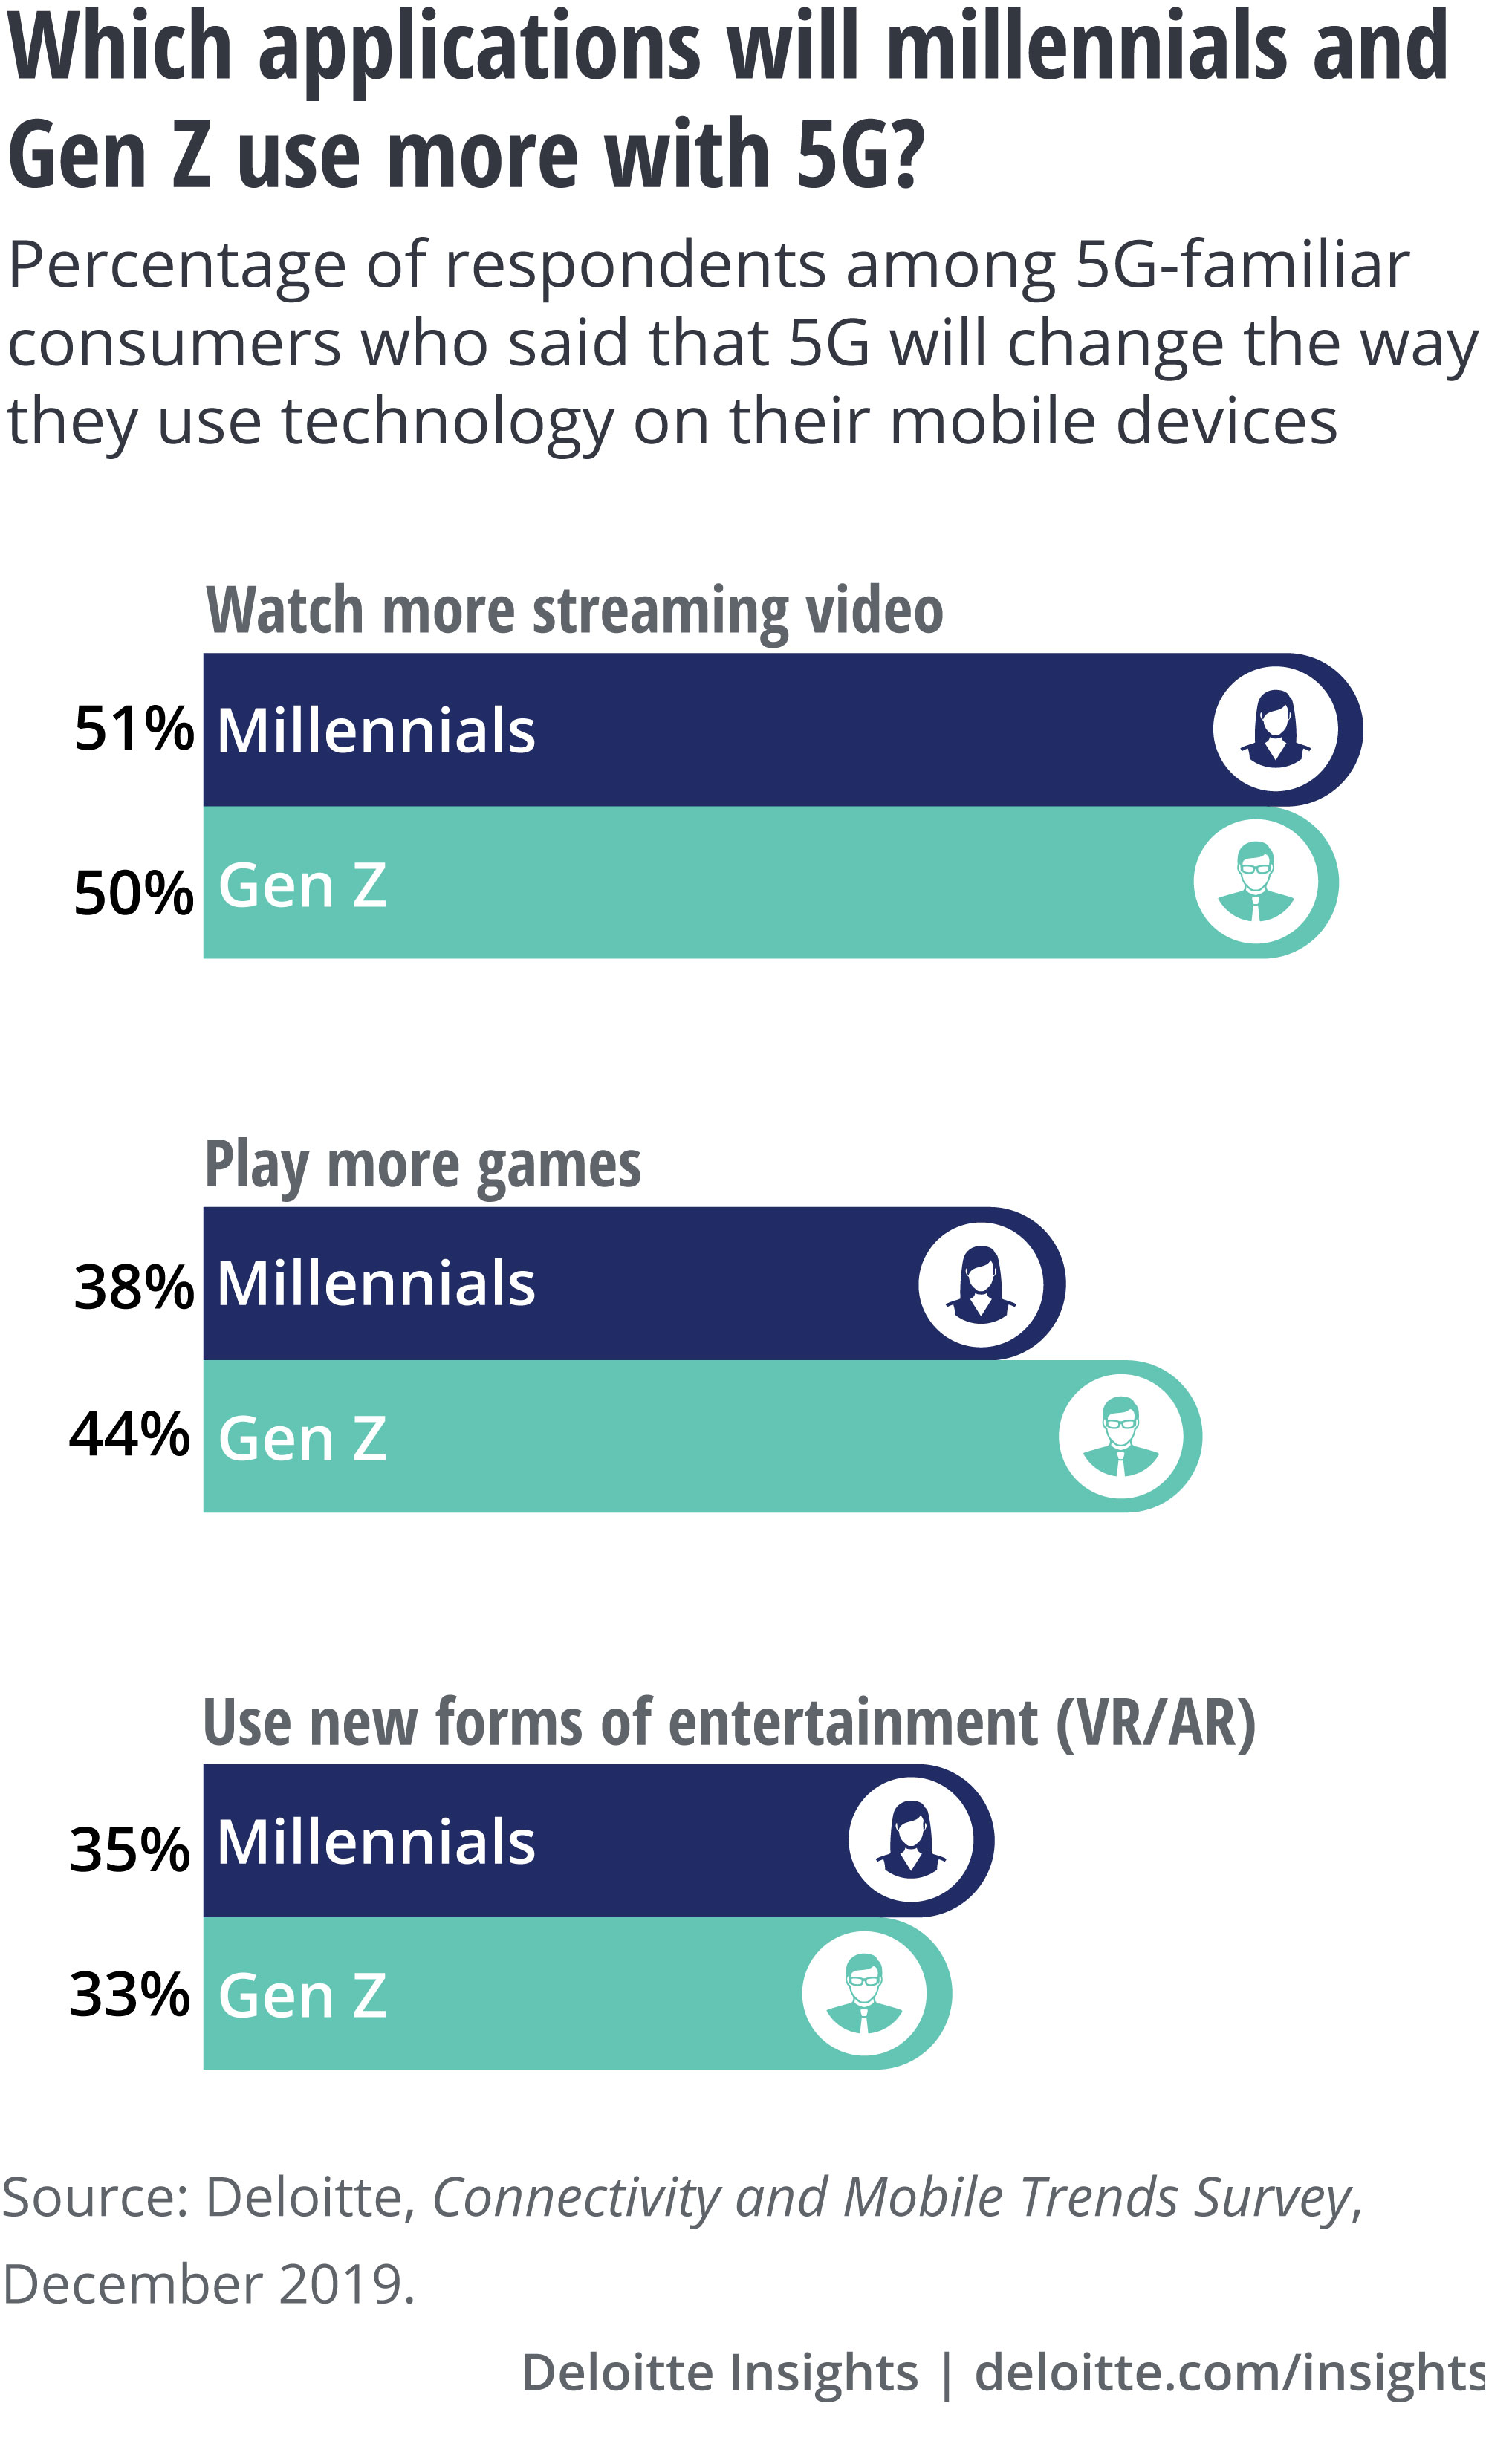 Which applications will millennials and Gen Z use more with 5G?